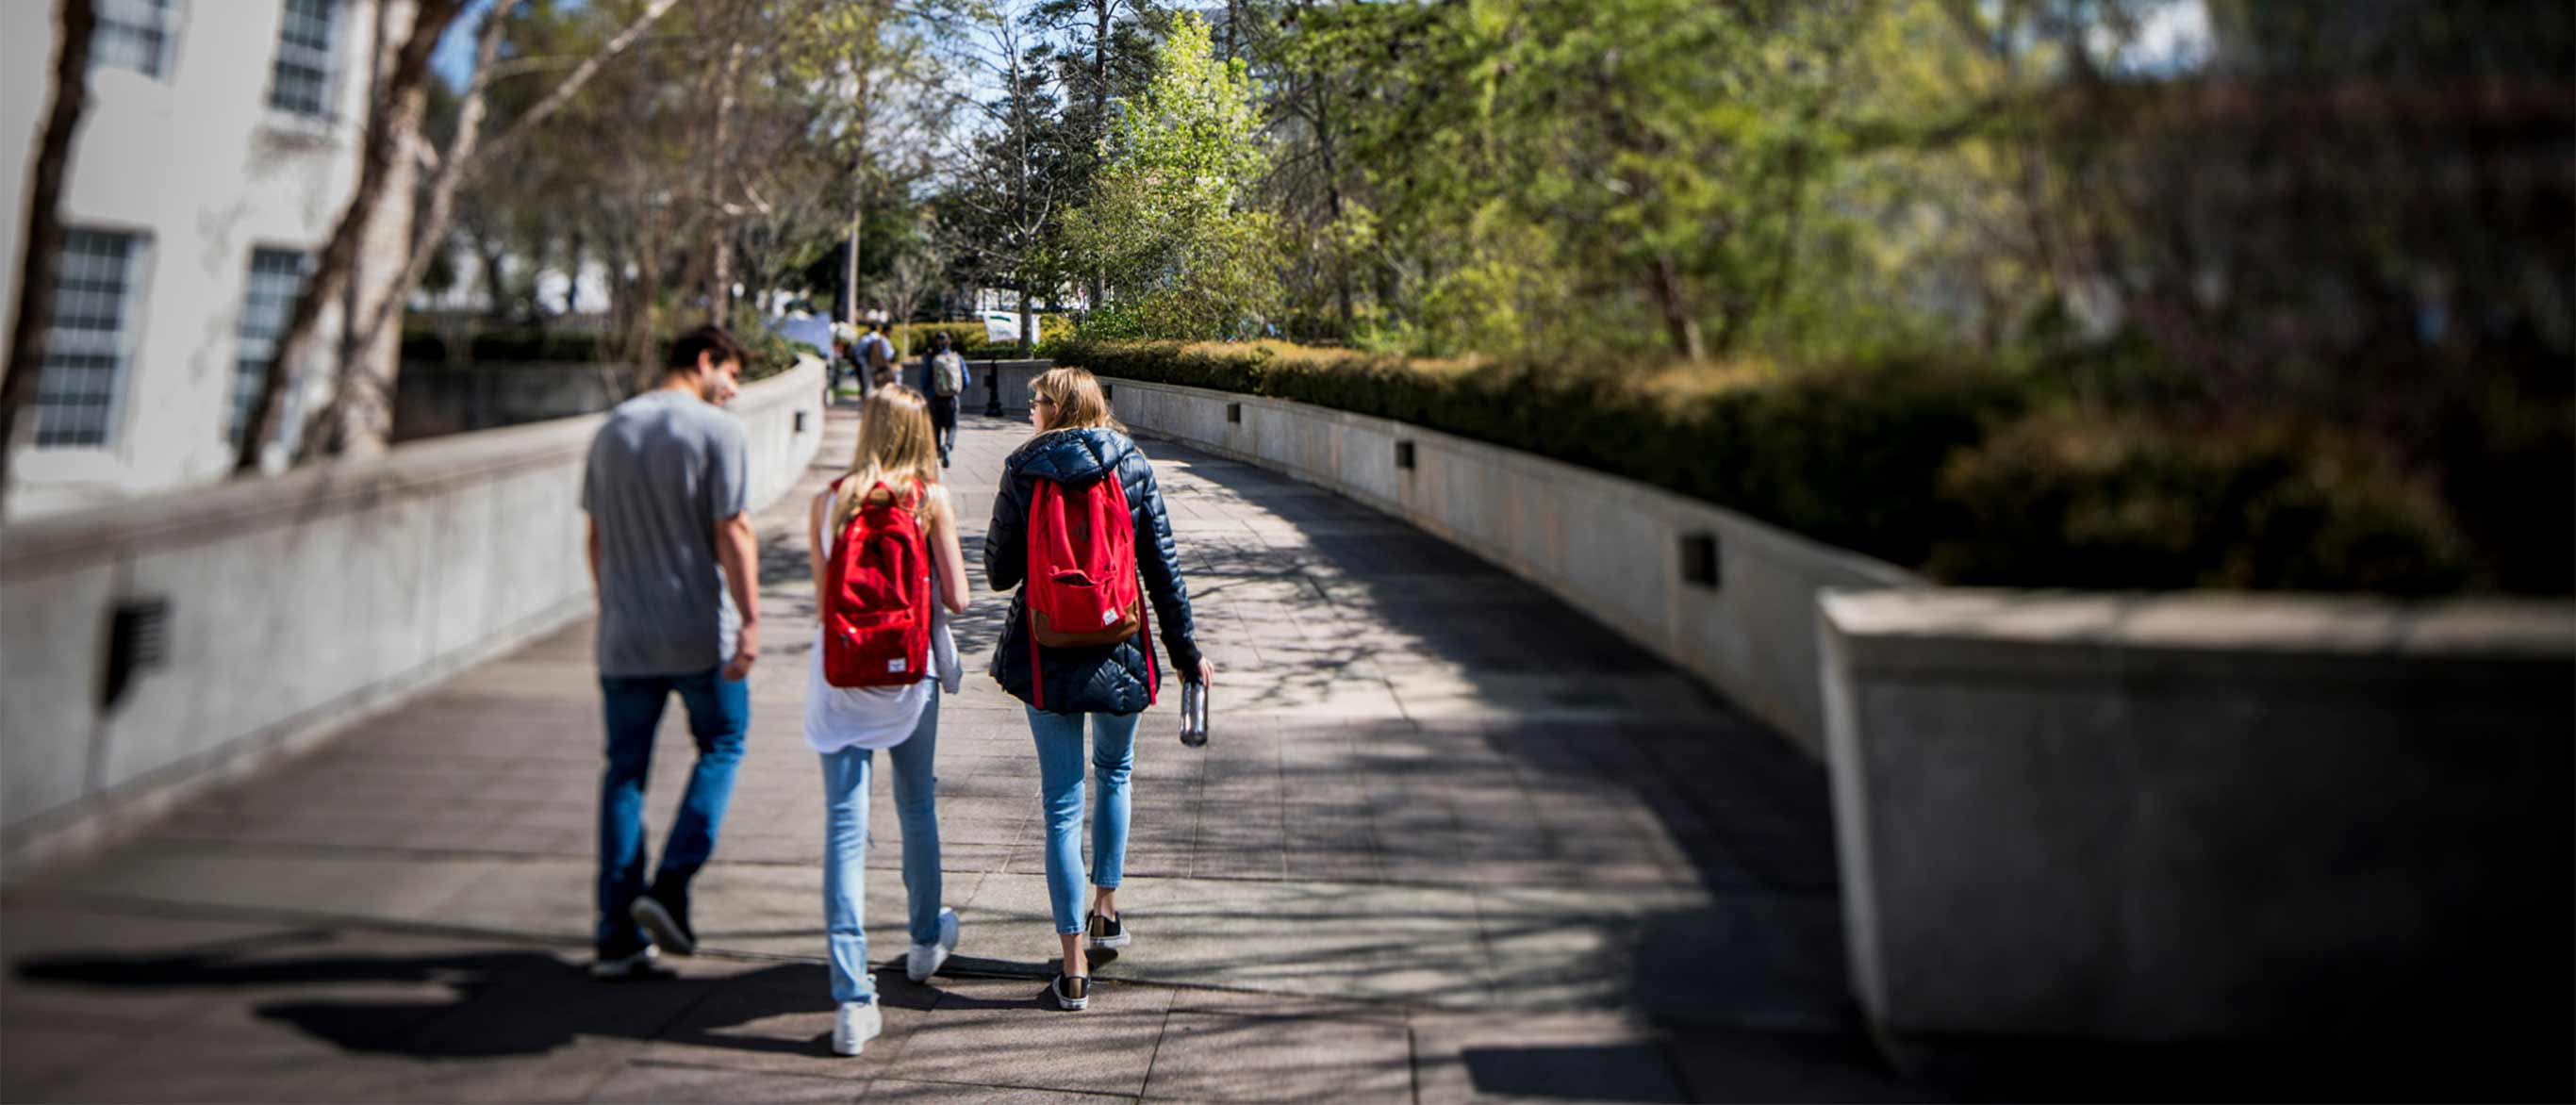 students walking on a path